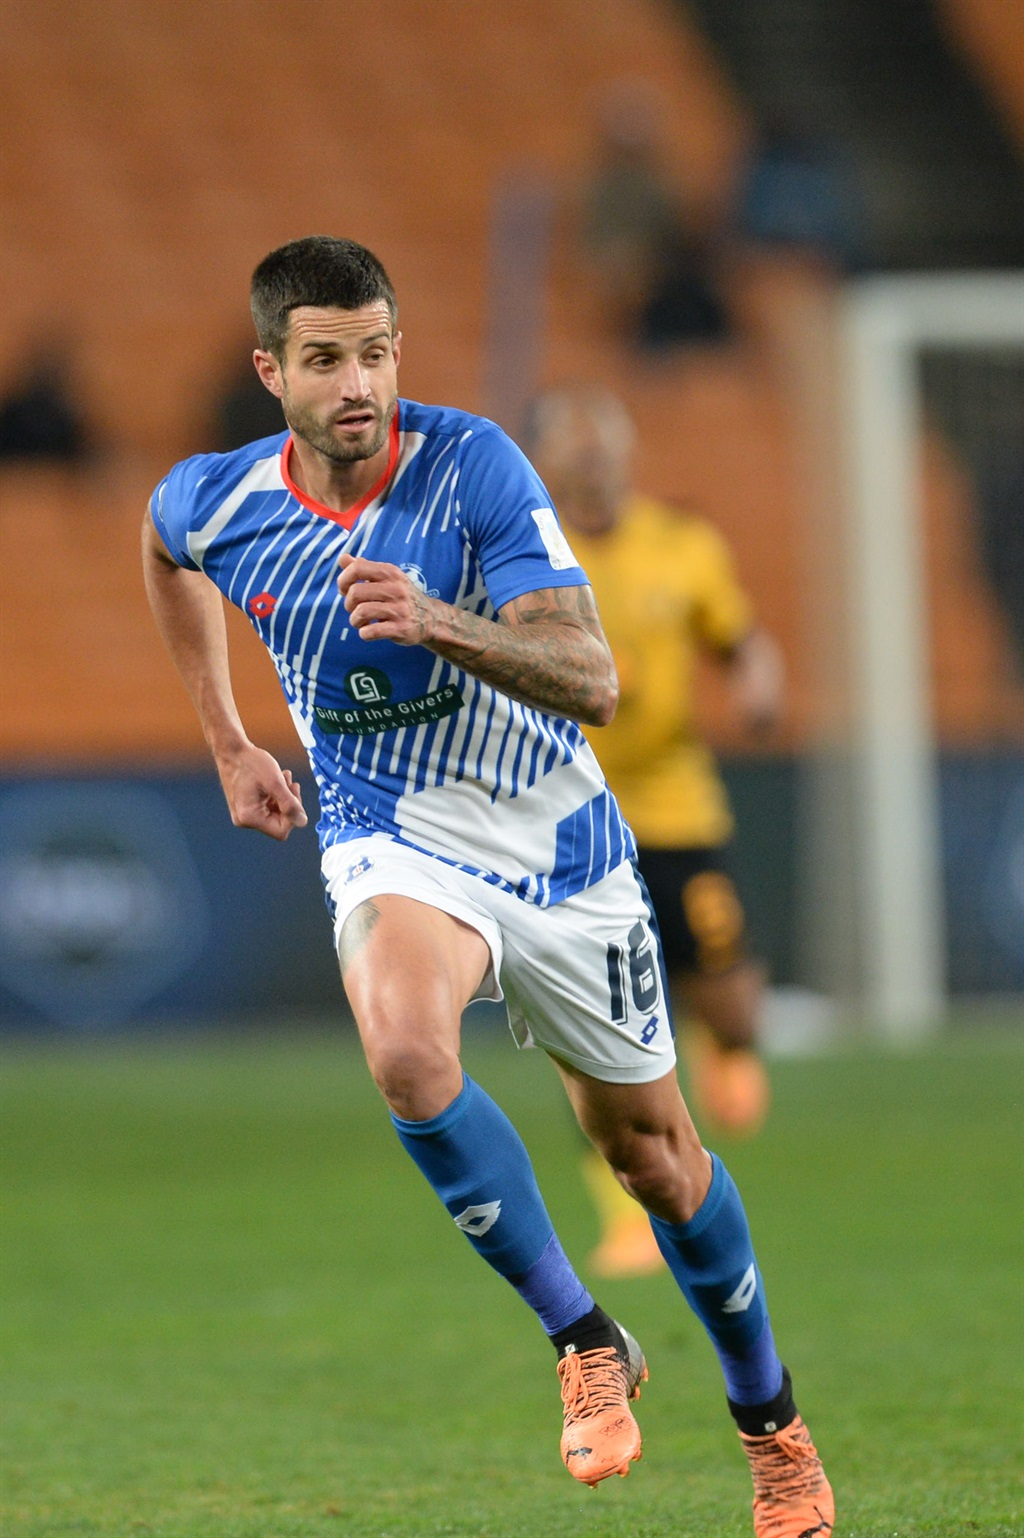 JOHANNESBURG, SOUTH AFRICA - AUGUST 09: Keagan Ritchie of Maritzburg United during the DStv Premiership match between Kaizer Chiefs and Maritzburg United at FNB Stadium on August 09, 2022 in Johannesburg, South Africa. (Photo by Lefty Shivambu/Gallo Images)